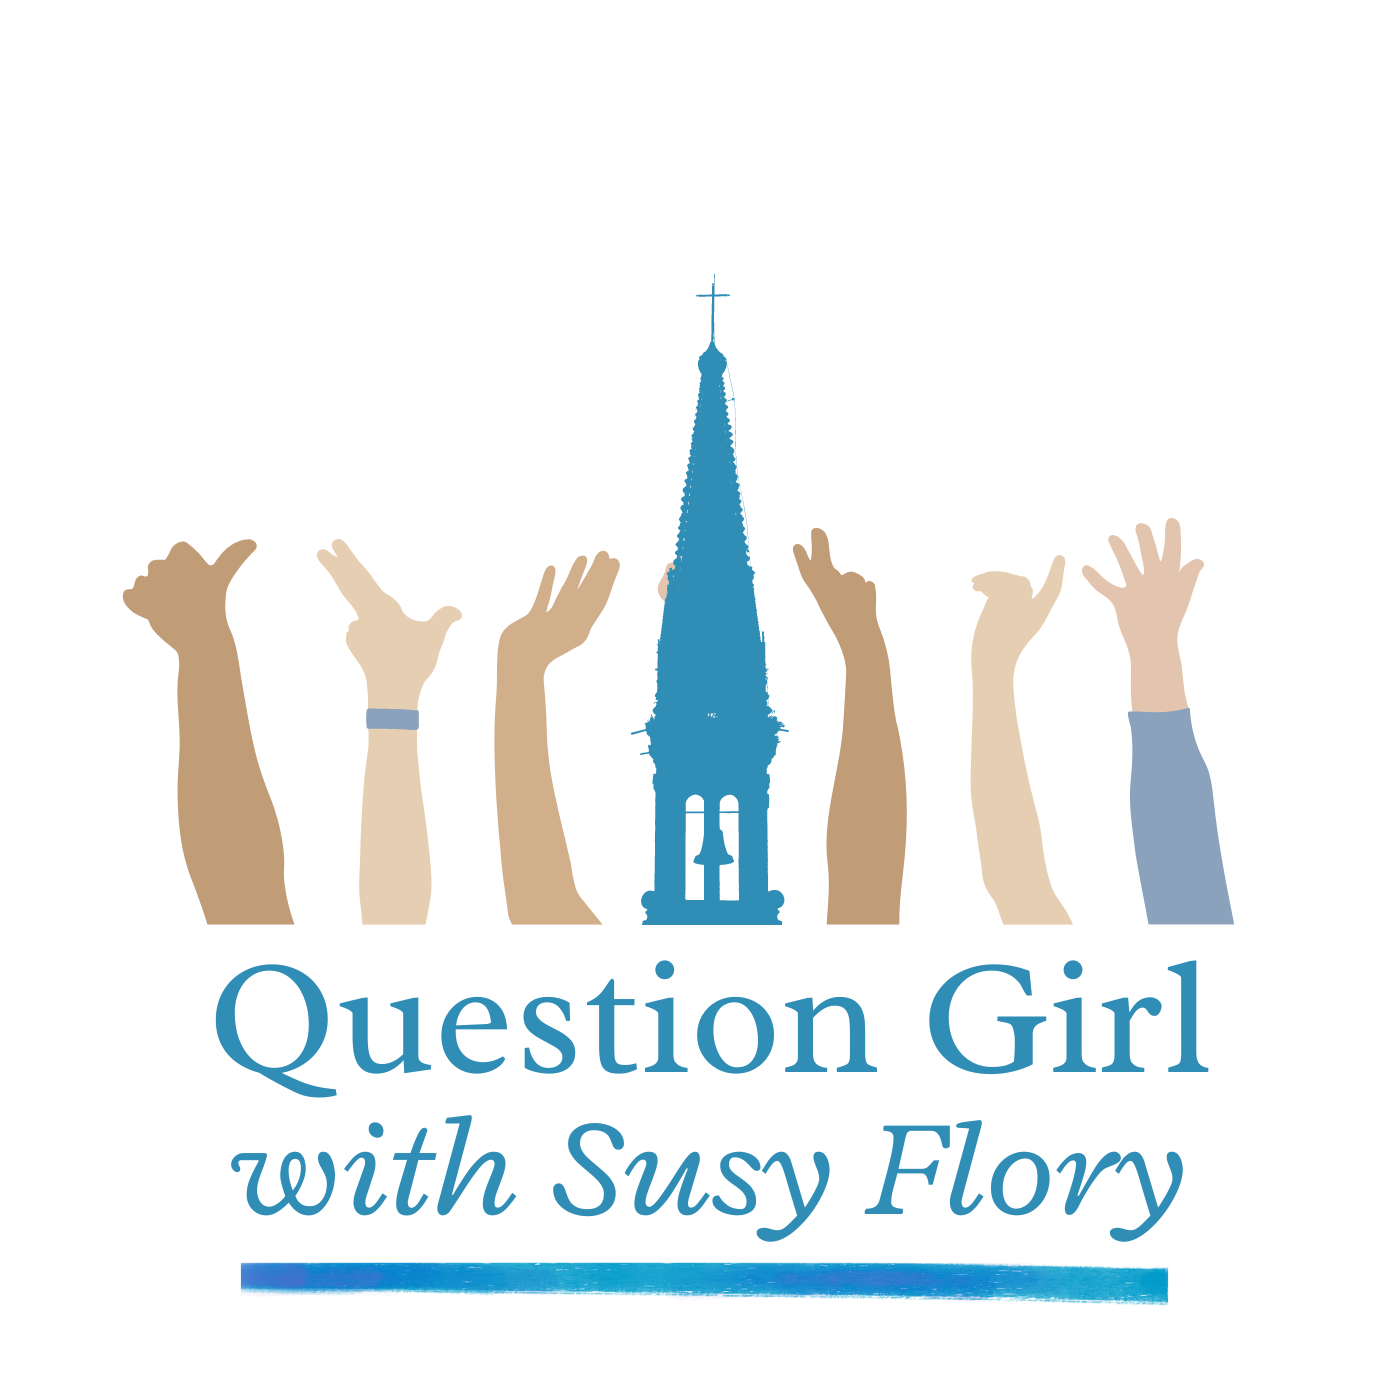 Question-Girls--256---256-px---1400---1400-px-.png